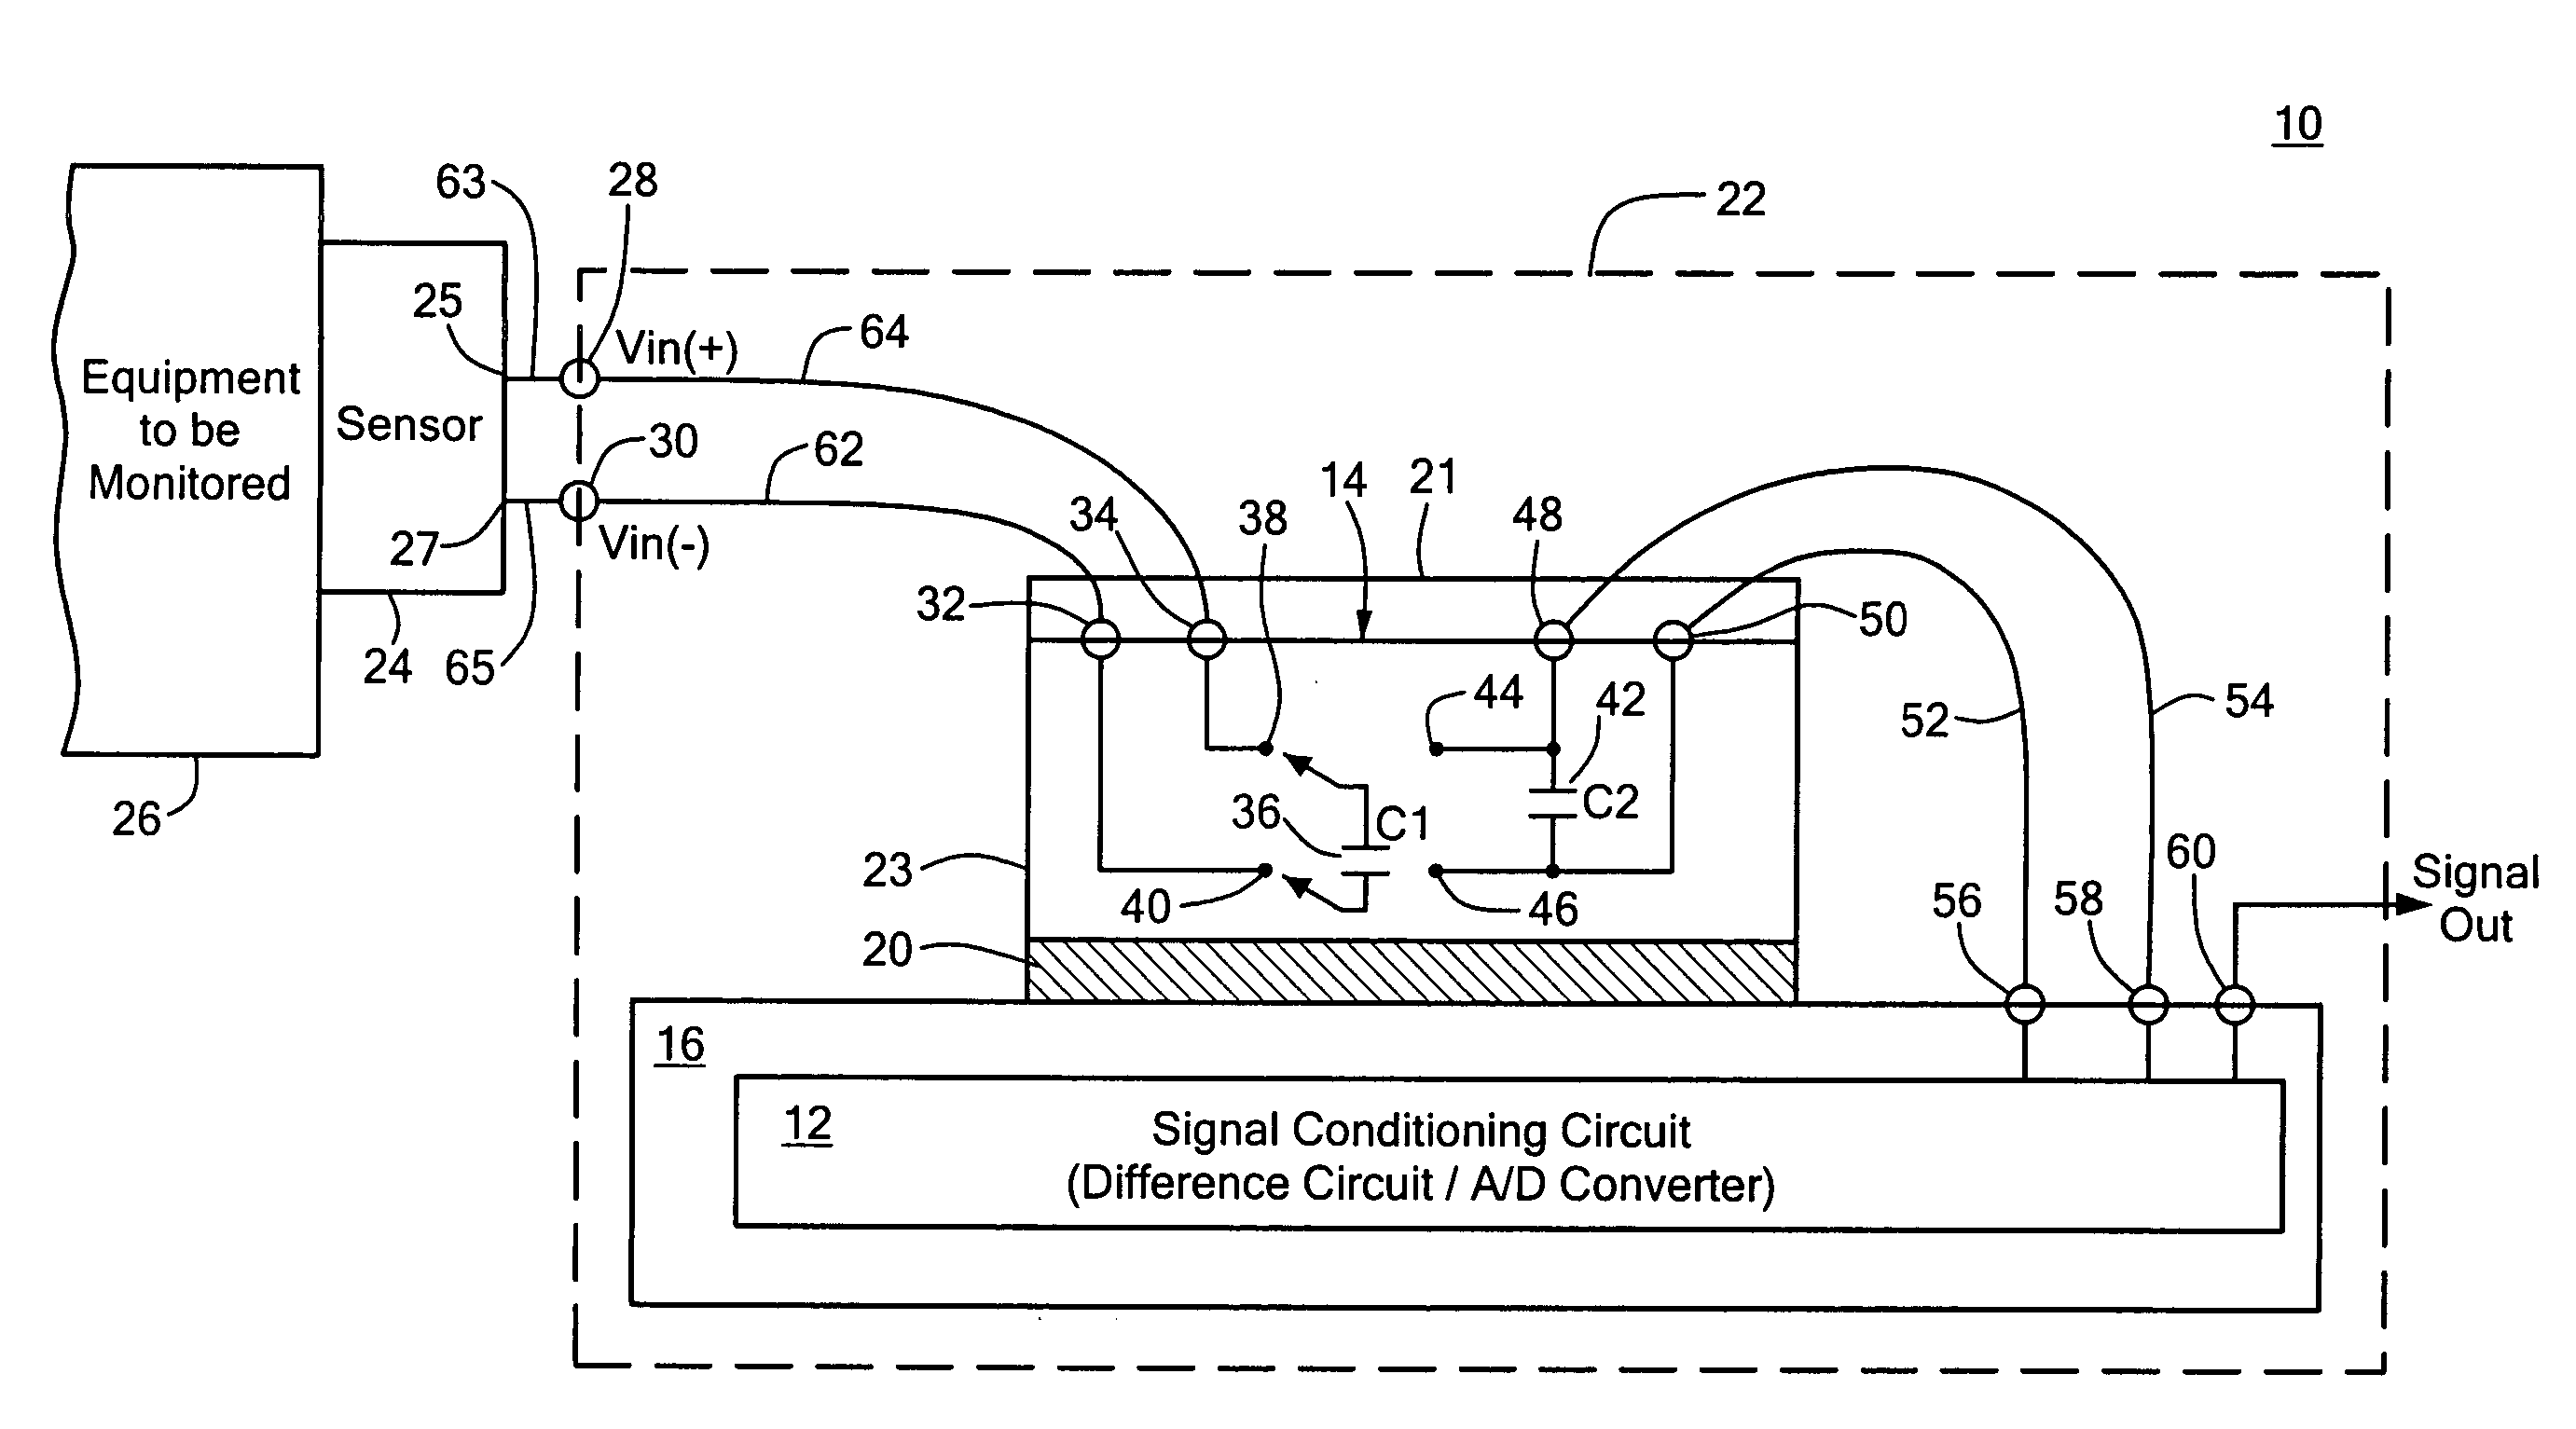 Galvanically isolated signal conditioning system